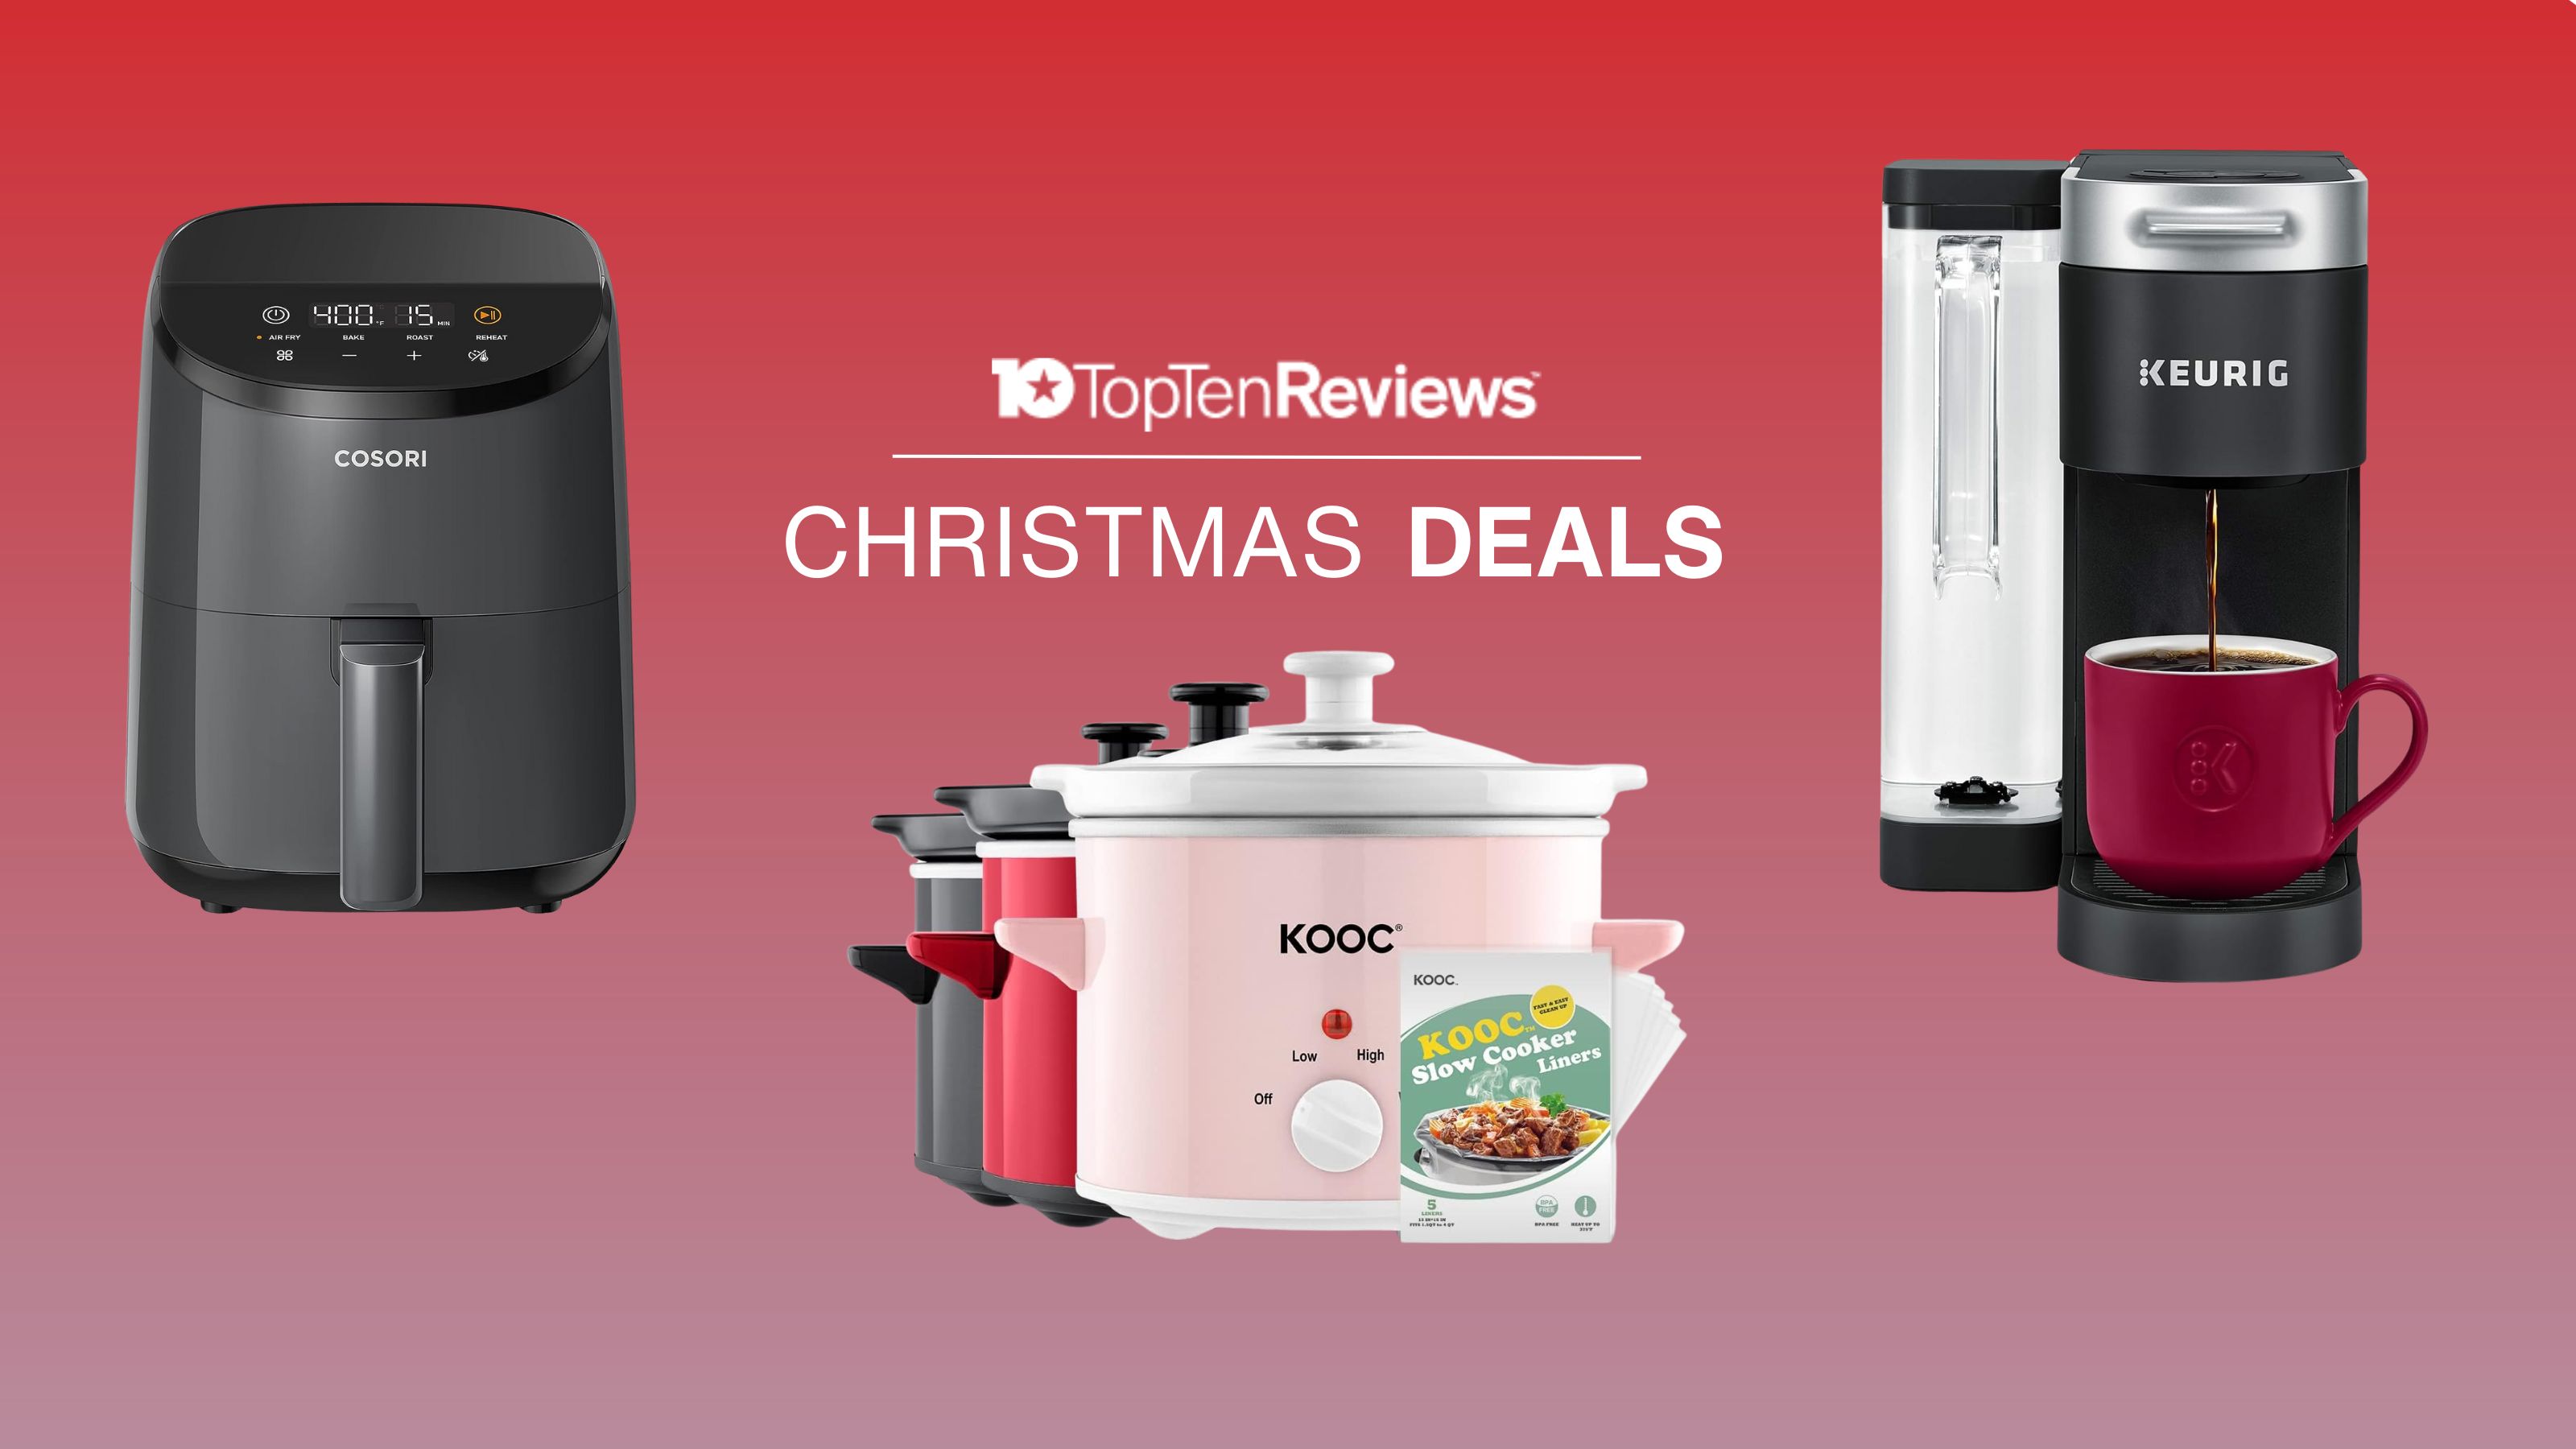 3 last-minute Christmas deals from Keurig, Cosori and KOOC that'll all  arrive before the big day - hurry, this is your last chance!